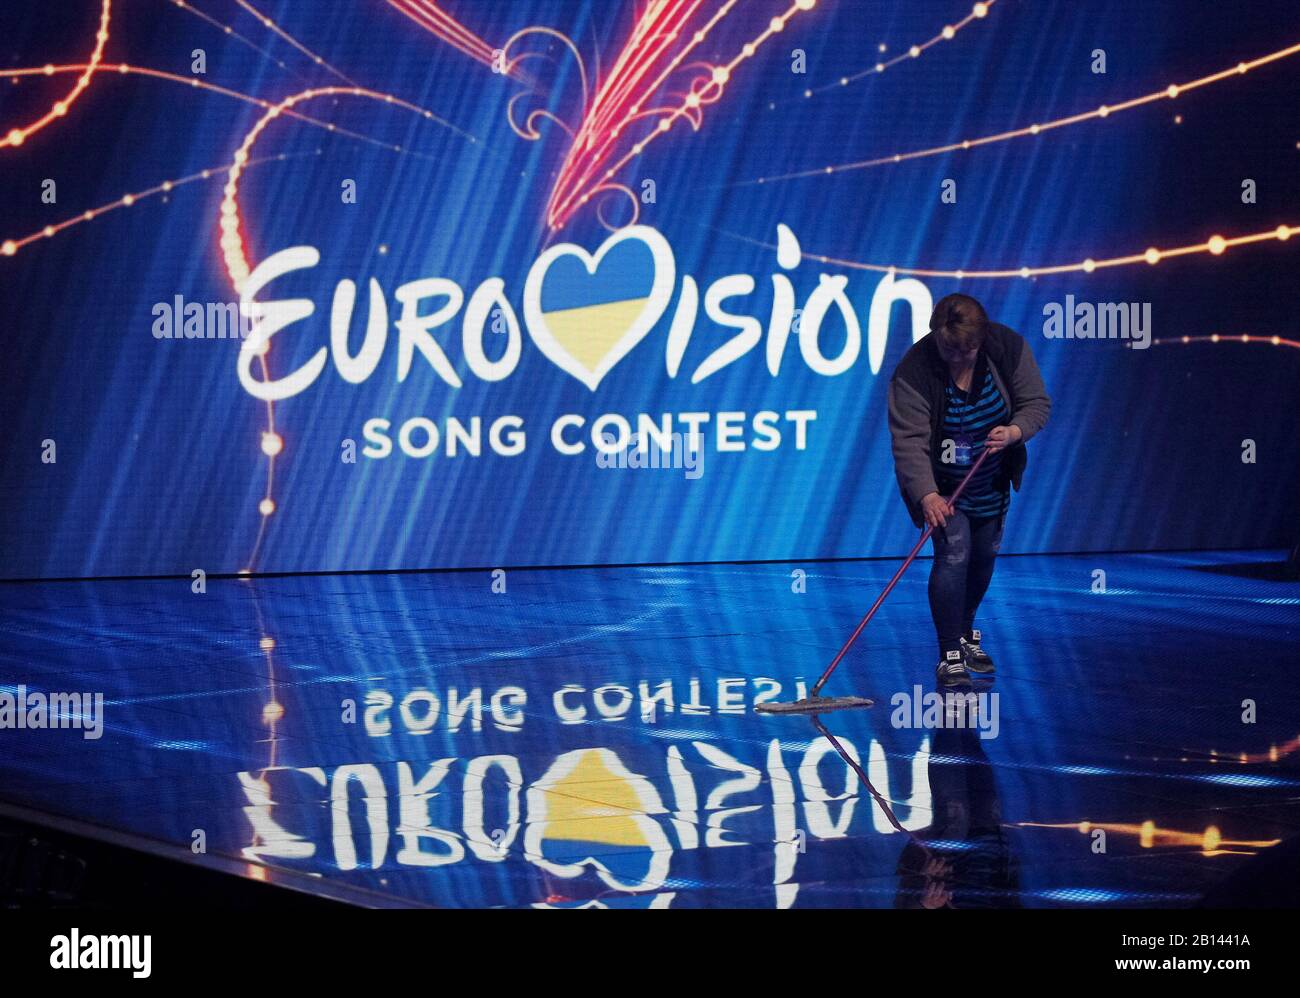 Kiev, Ukraine. 22nd Feb, 2020. A worker cleans the stage during the 2020 Eurovision Song Contest (ESC) national selection show in Kiev.Ukrainian band Go A with song Solovey will represent Ukraine at the 2020 Eurovision Song Contest (ESC) in Netherlands. The 65th anniversary Eurovision song contest will be held in Rotterdam (Netherlands) from May 12 to May 16, 2020. Ukraine, which missed the competition last year, intends to return to participation in 2020. Credit: SOPA Images Limited/Alamy Live News Stock Photo